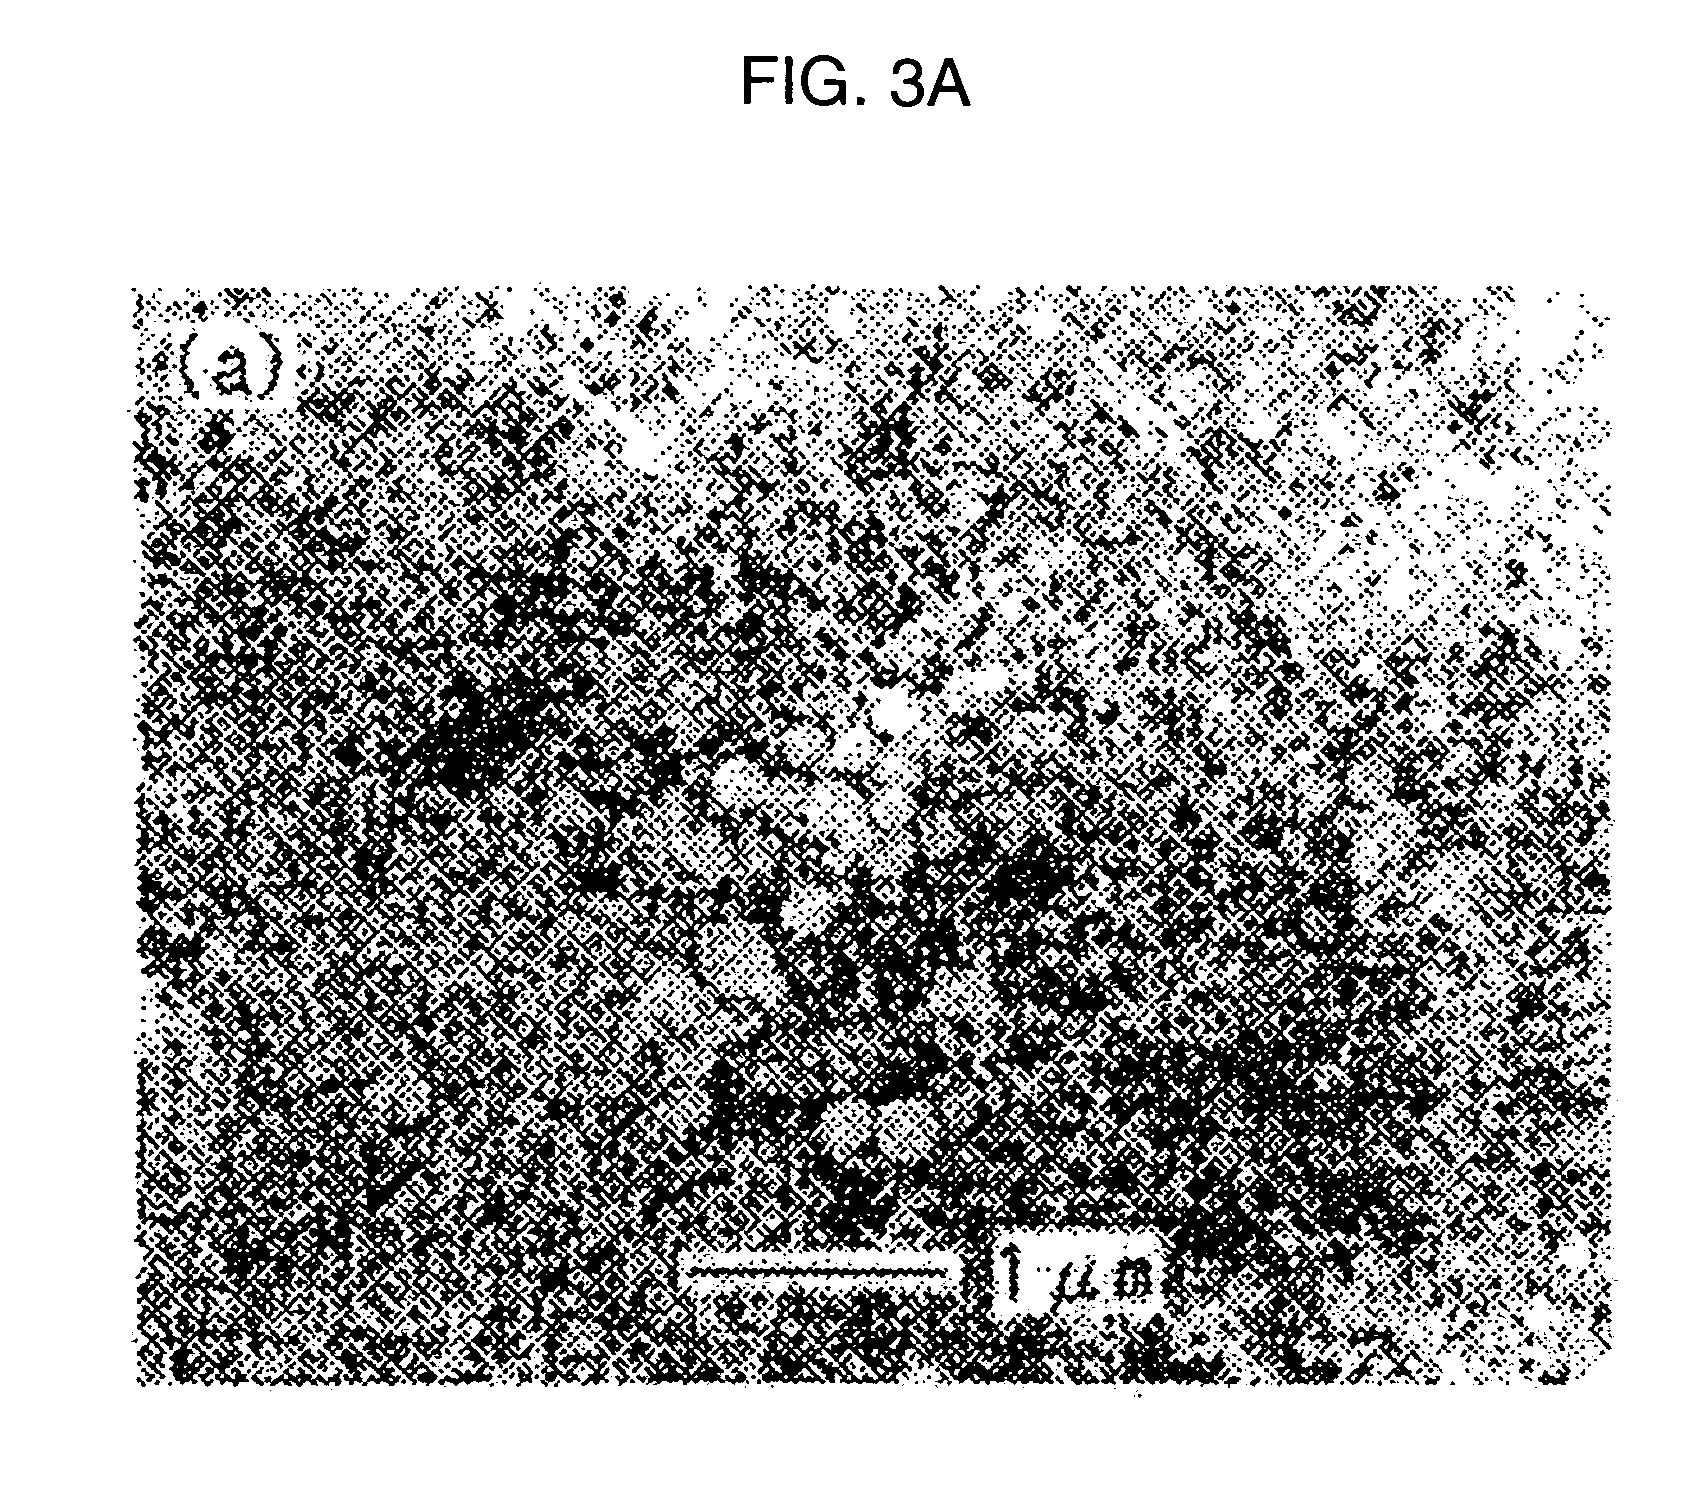 Negative active material for rechargeable lithium battery, method of preparing same and rechargeable lithium battery using same